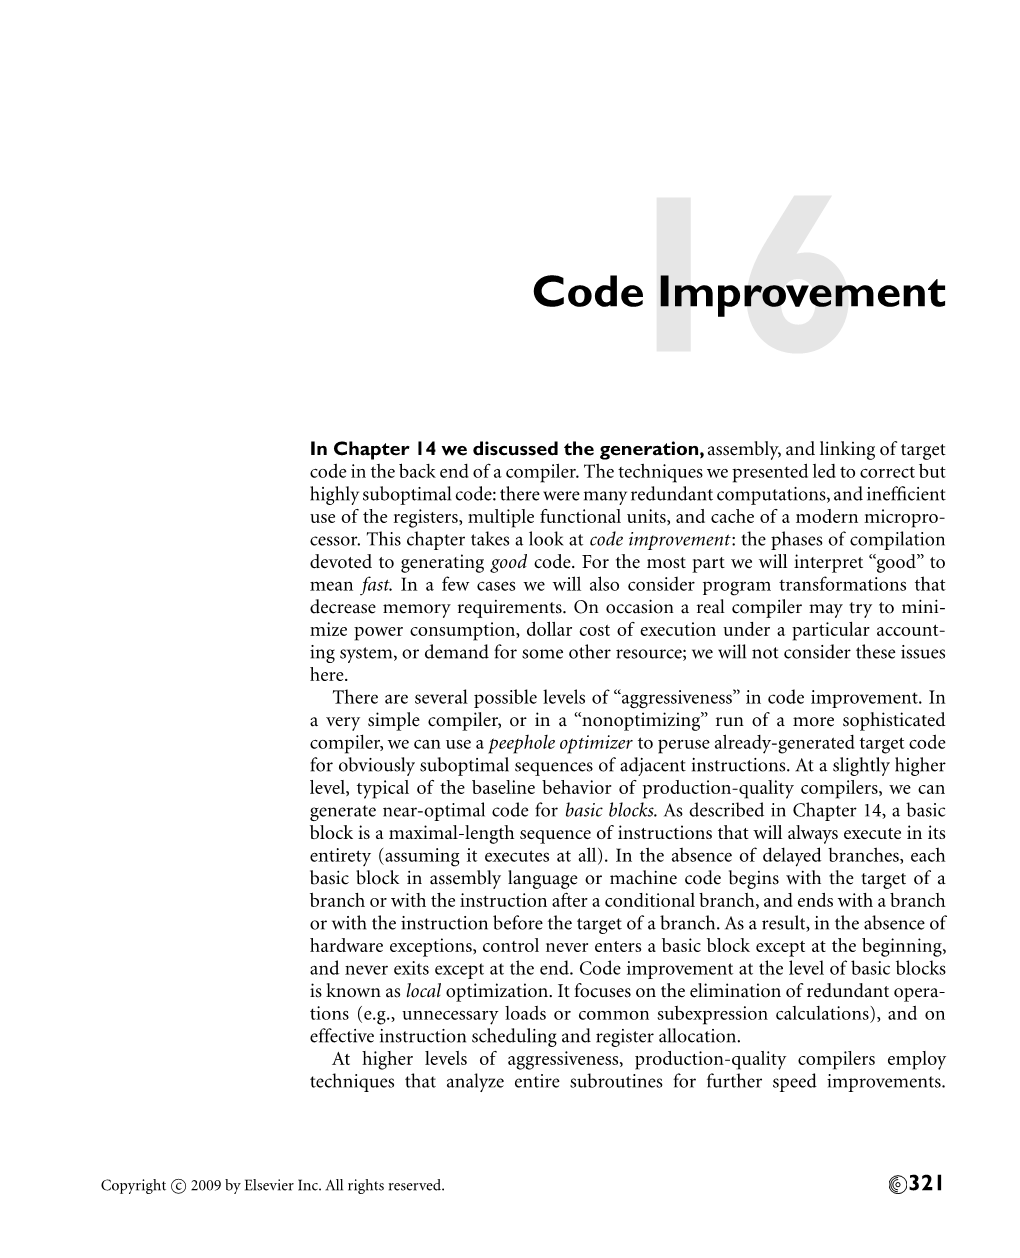 Code Improvement: the Phases of Compilation Devoted to Generating Good Code